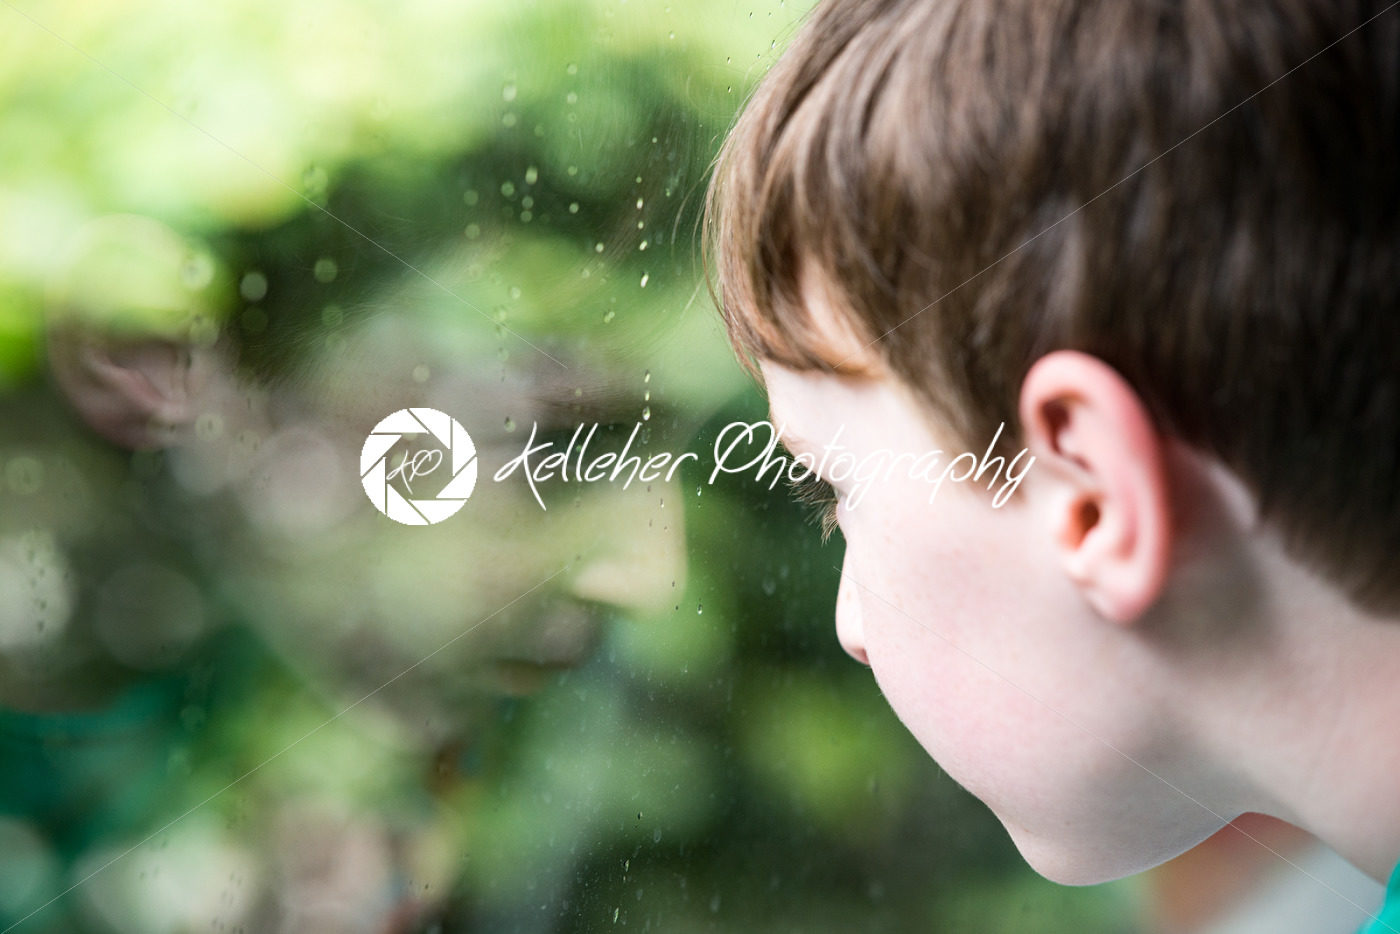 Young little boy portrait looking at something - Kelleher Photography Store